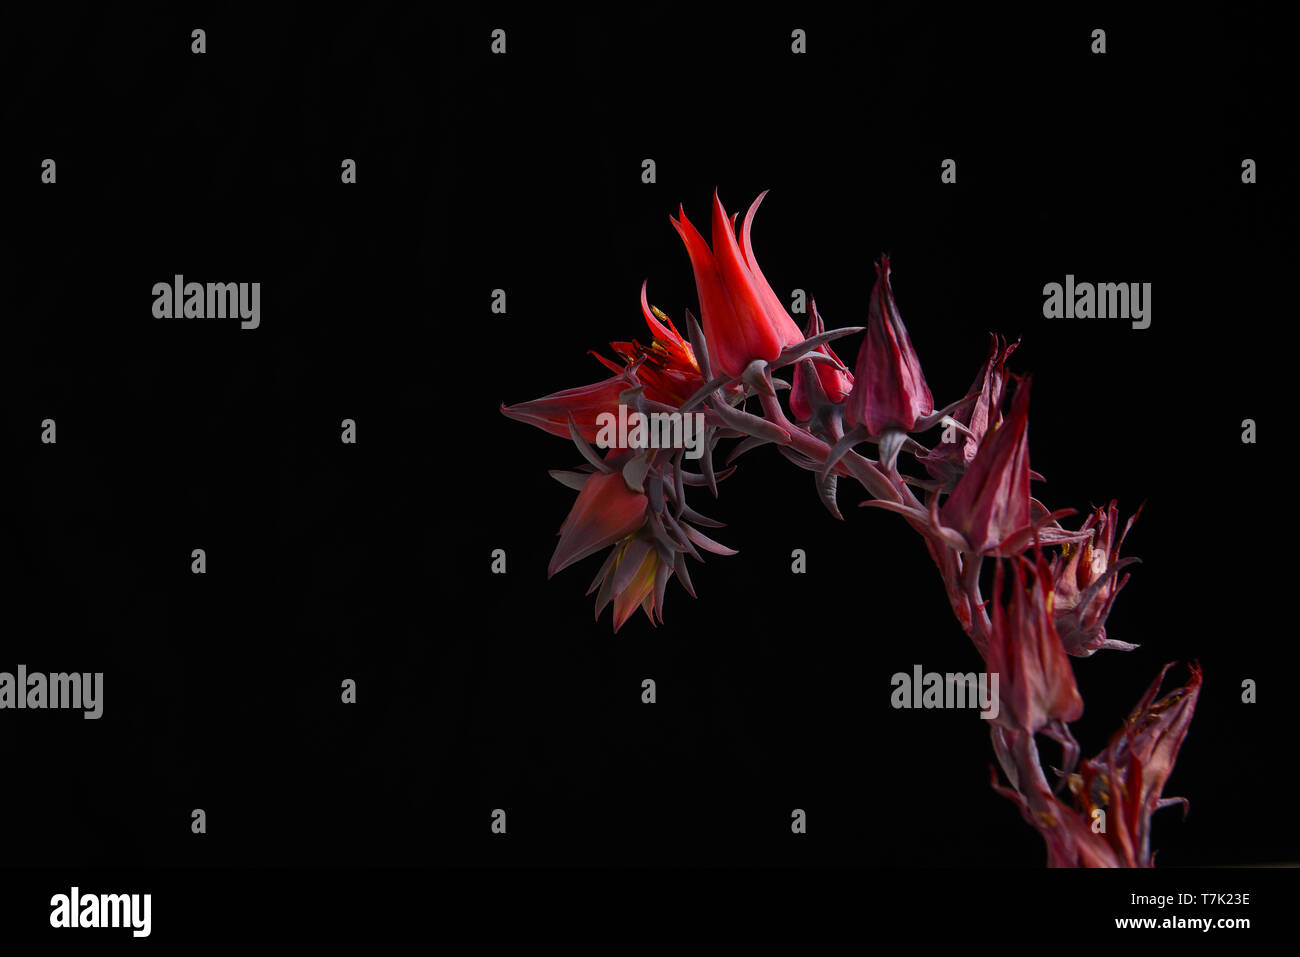 Flowers of the Echeveria Afterglow succulent plant against a black background. Stock Photo